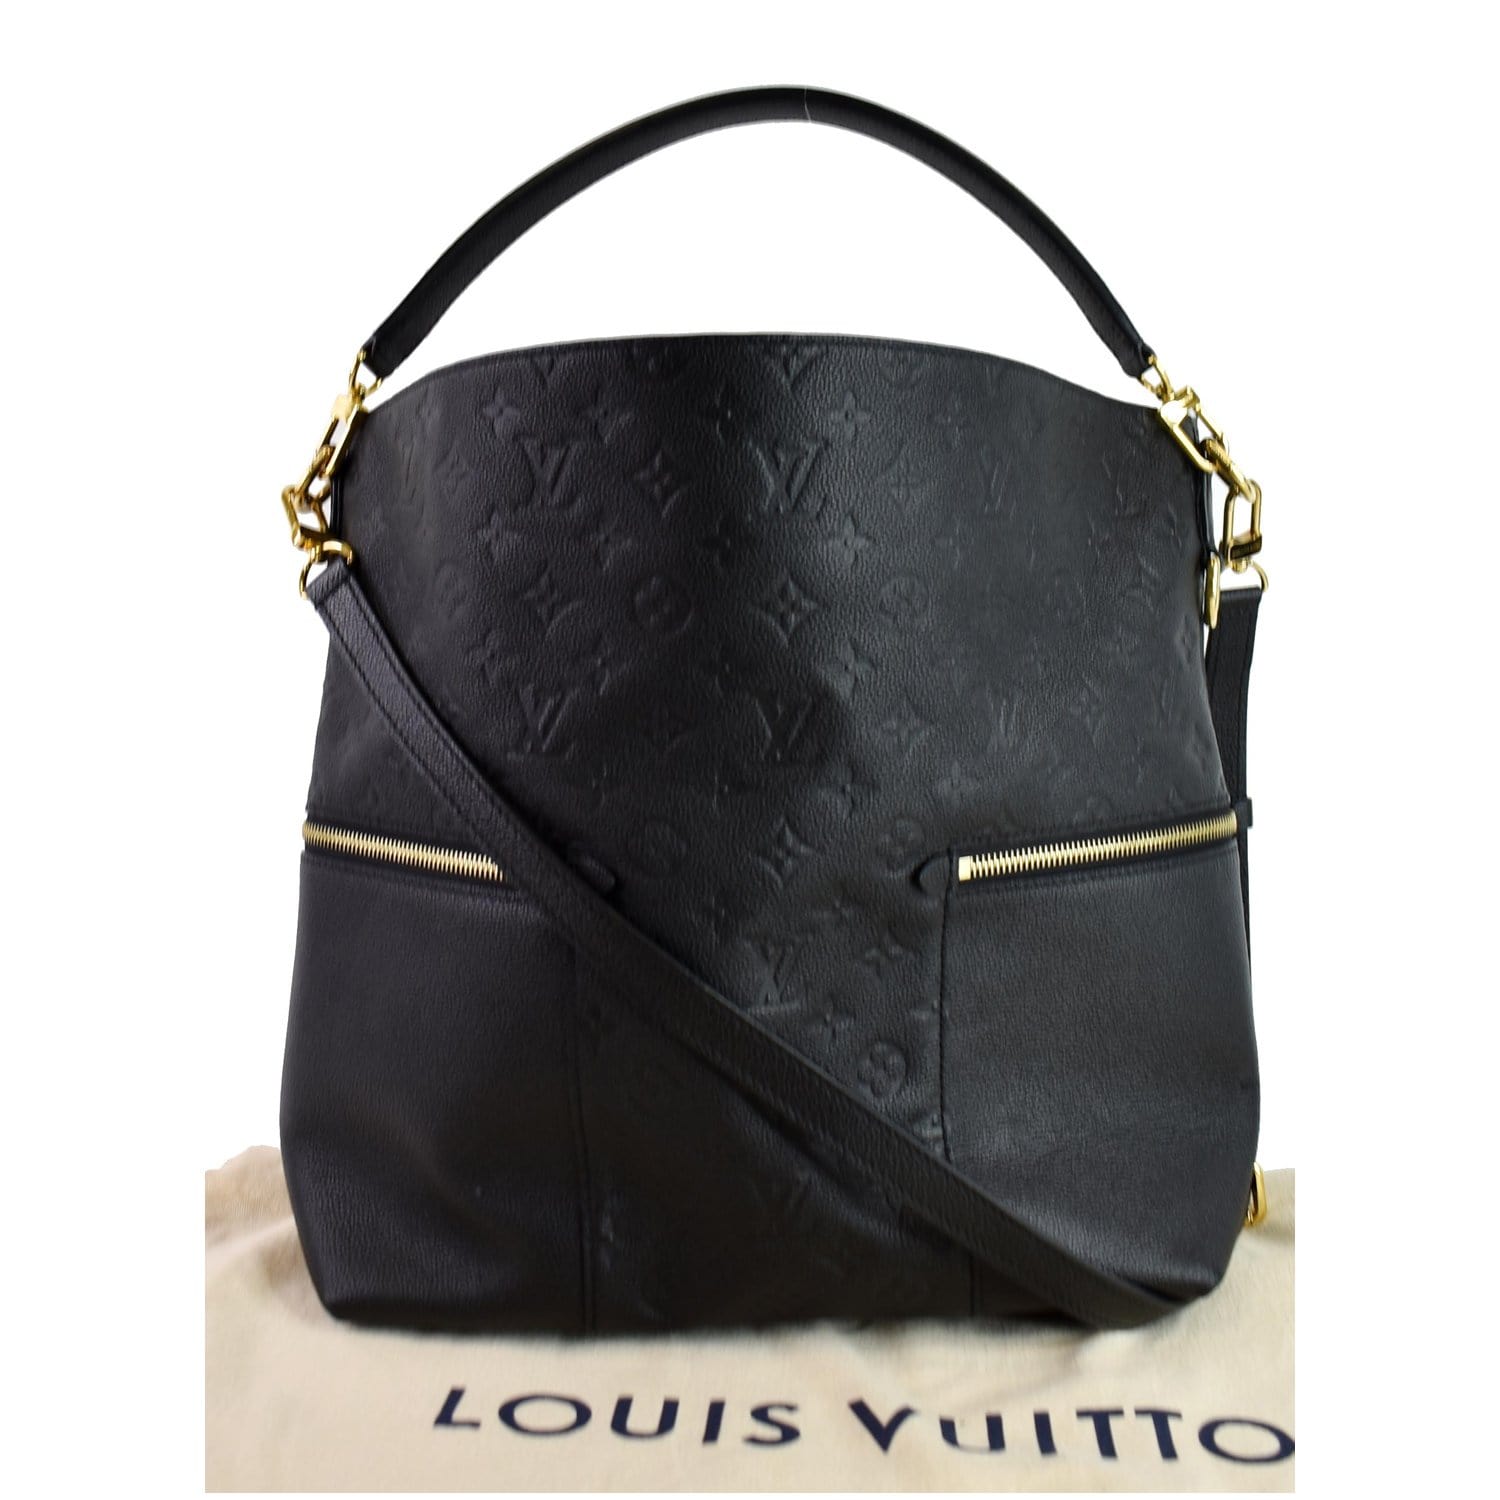 Louis Vuitton Black Empreinte Leather Melie Bag Gold Hardware, 2019  Available For Immediate Sale At Sotheby's